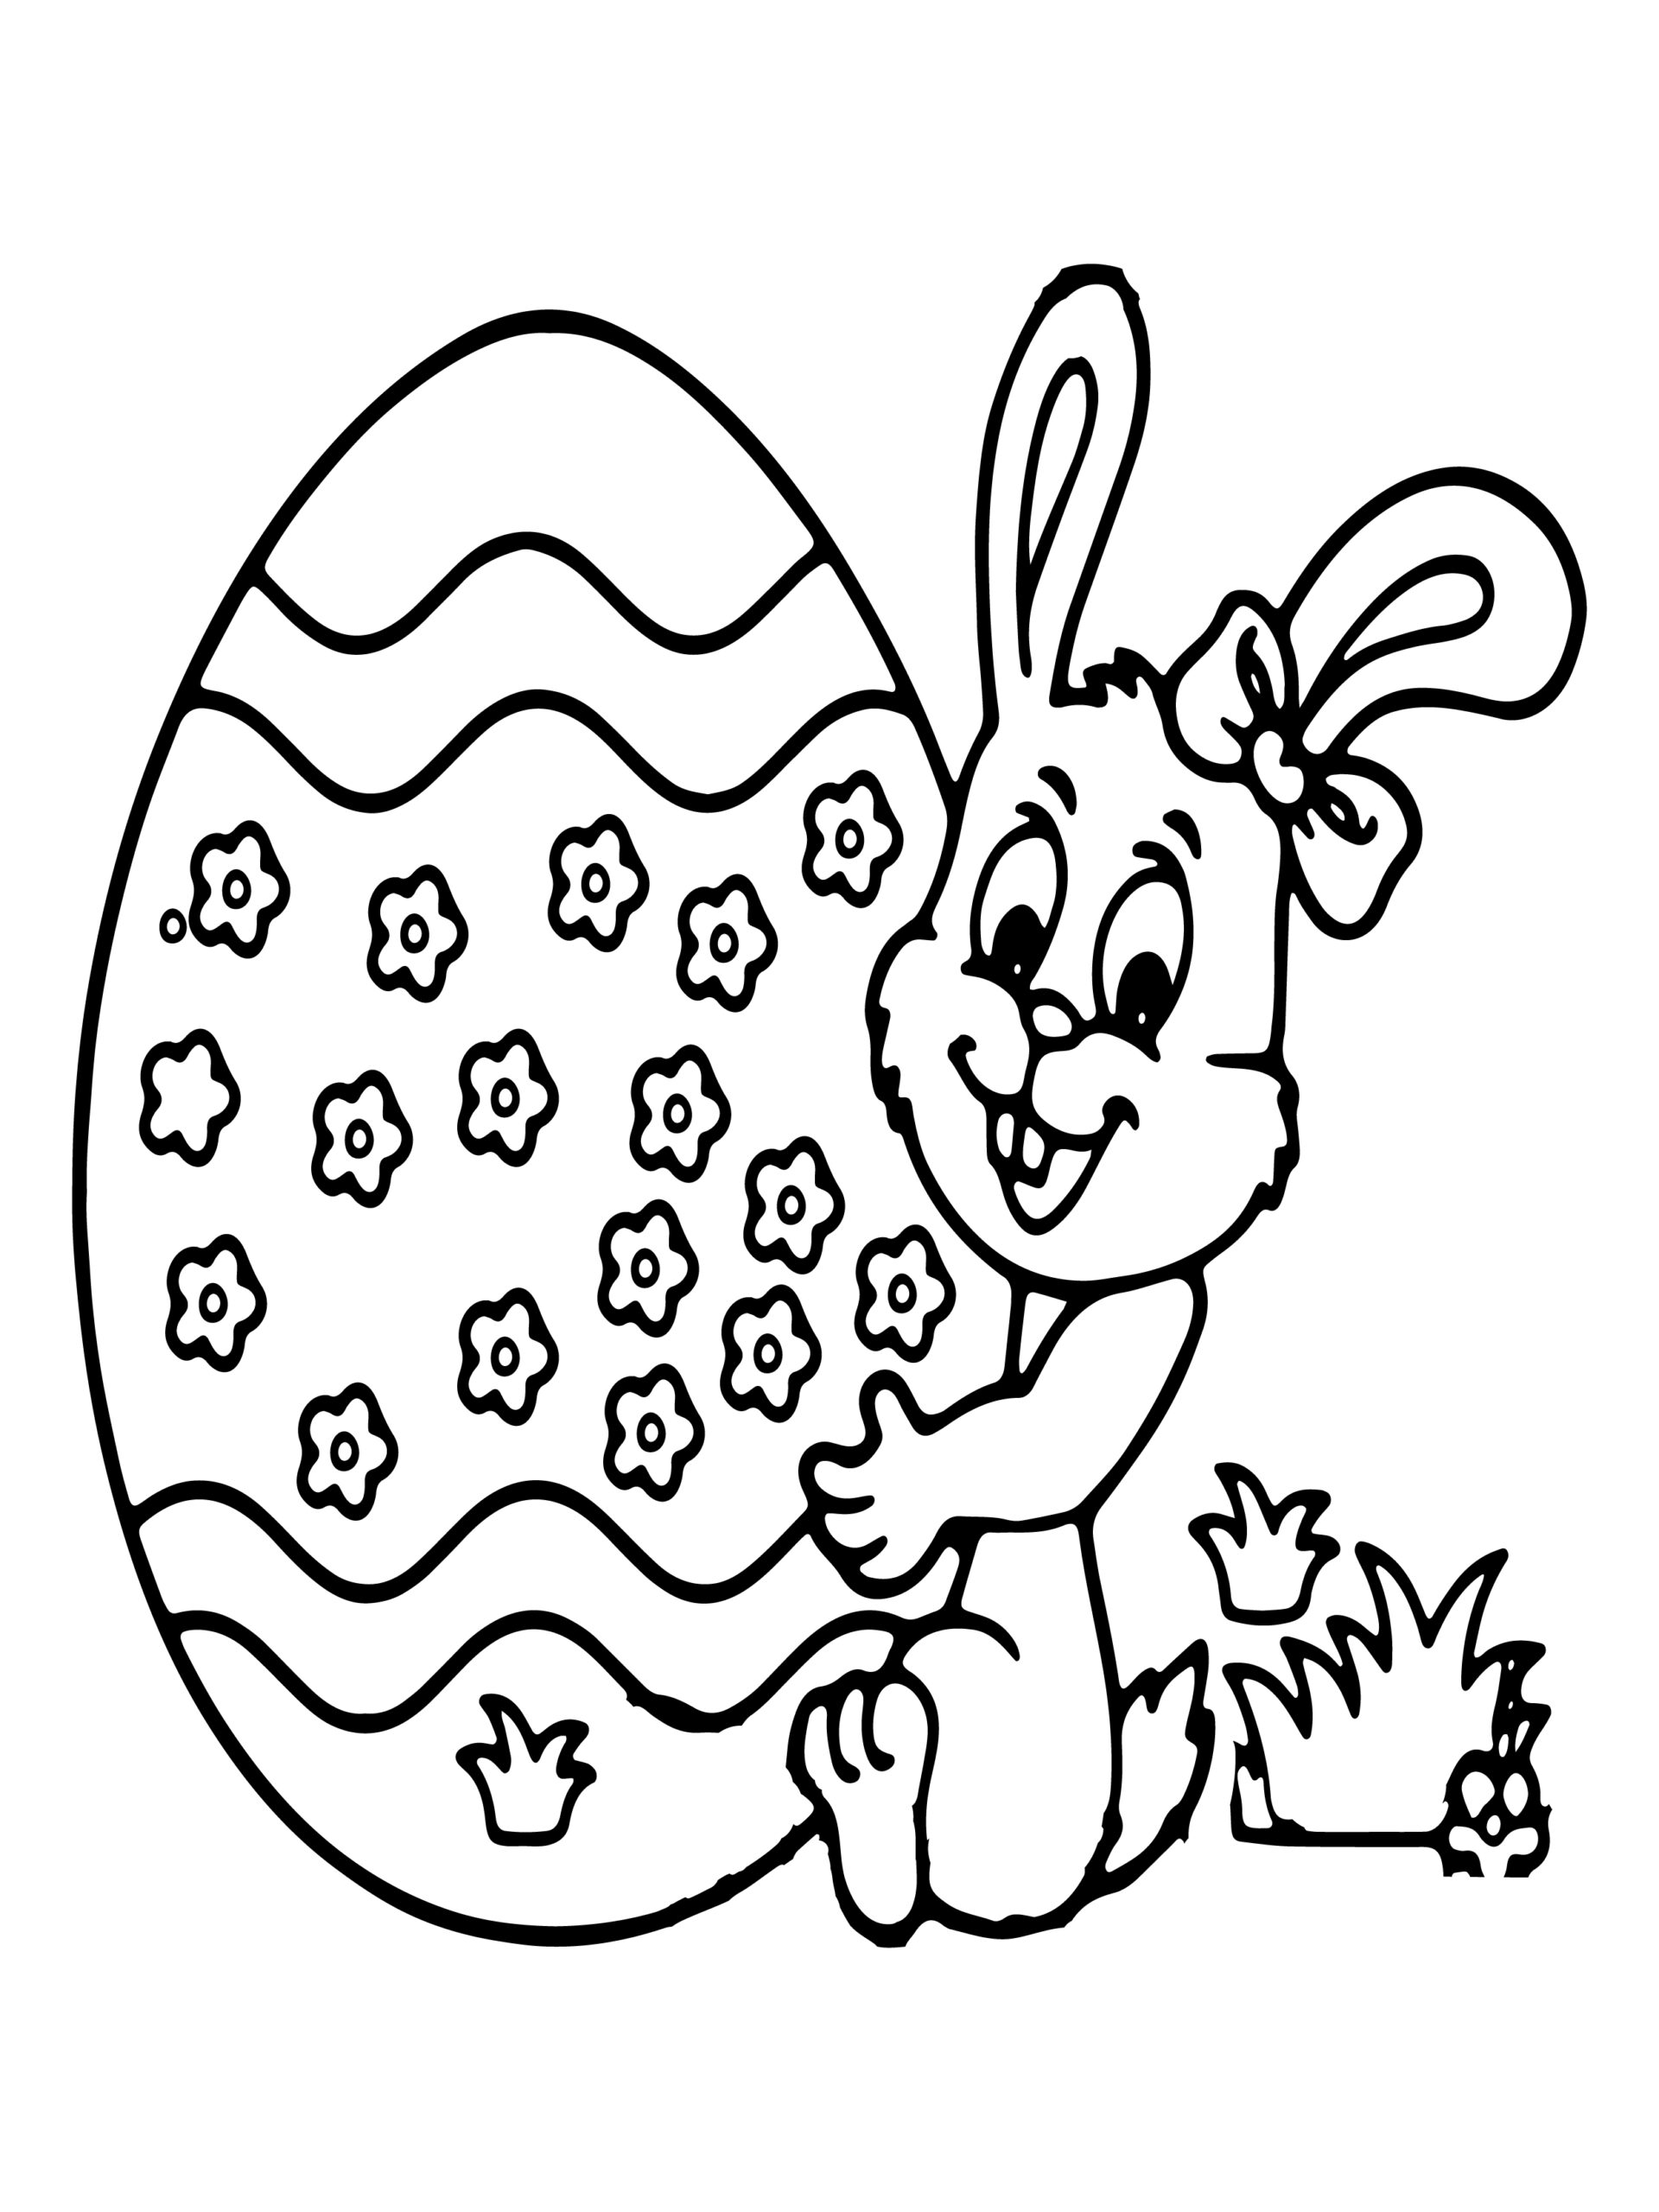 satisfied easter Coloring Page - Free Printable Coloring Pages for Kids